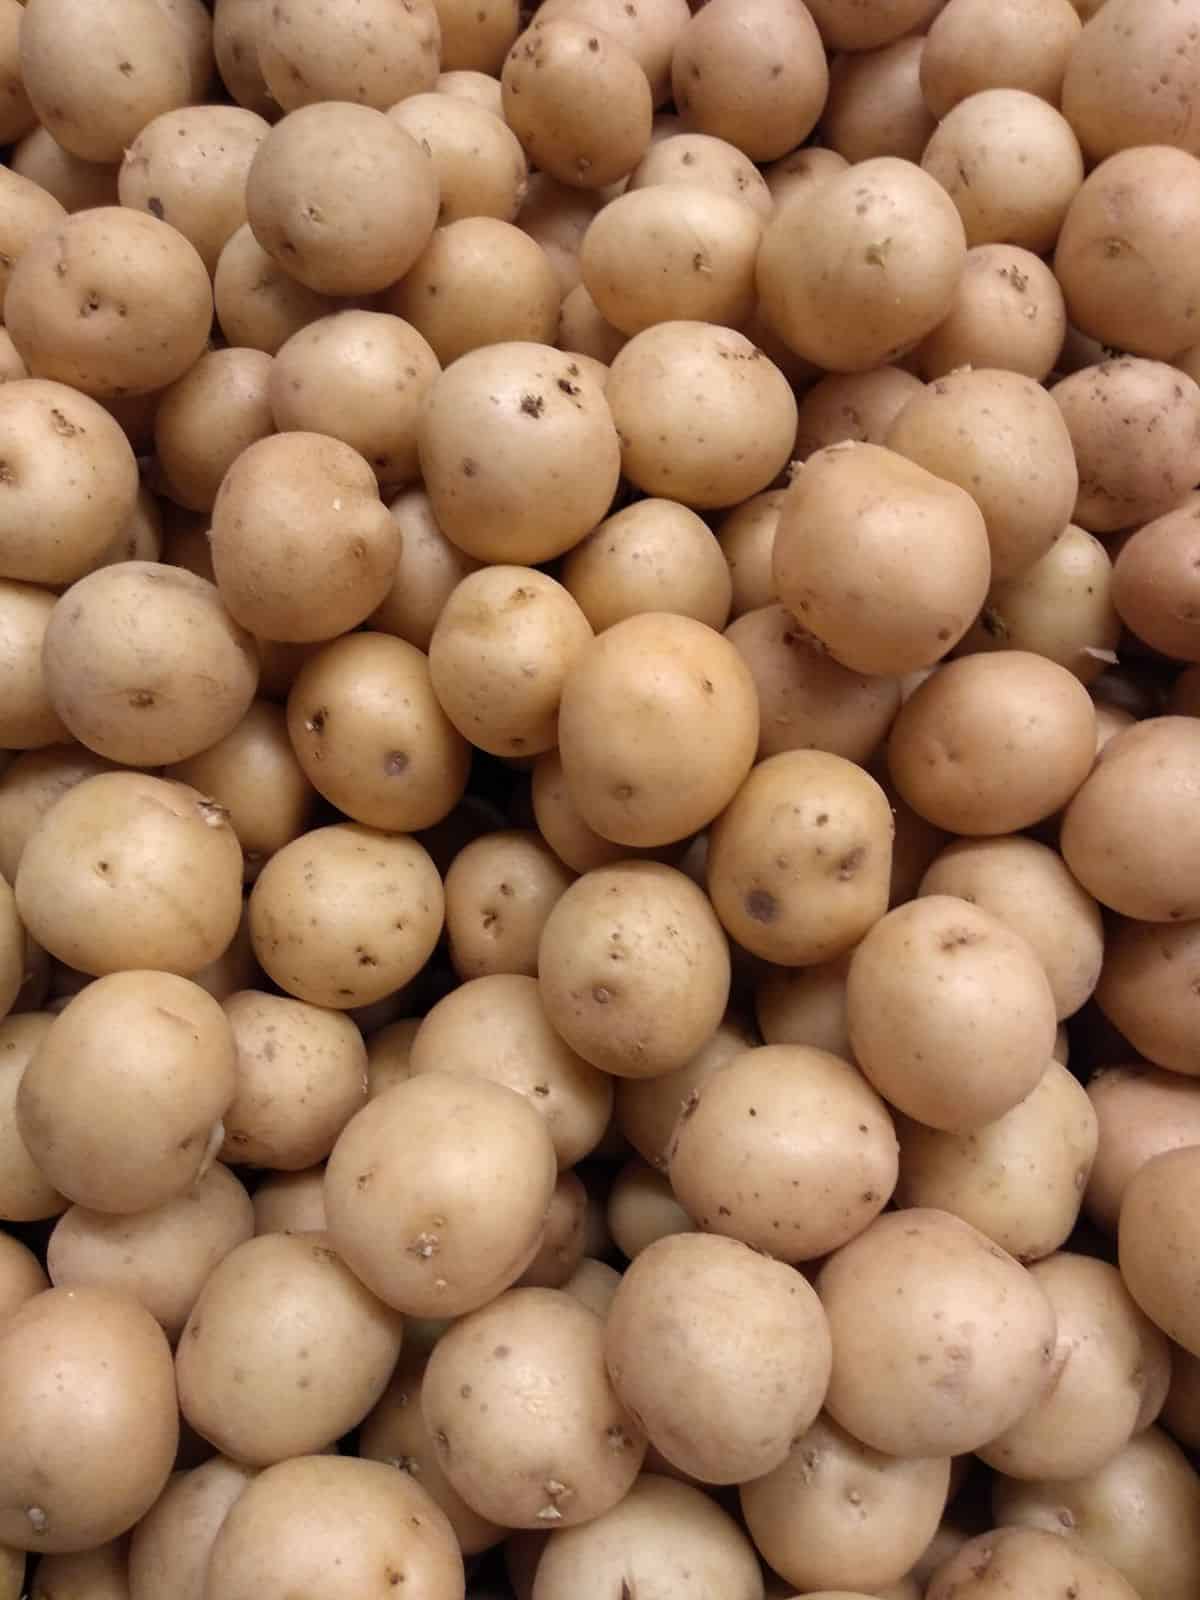 A close up view of small yellow potatoes in a bin at a grocery store